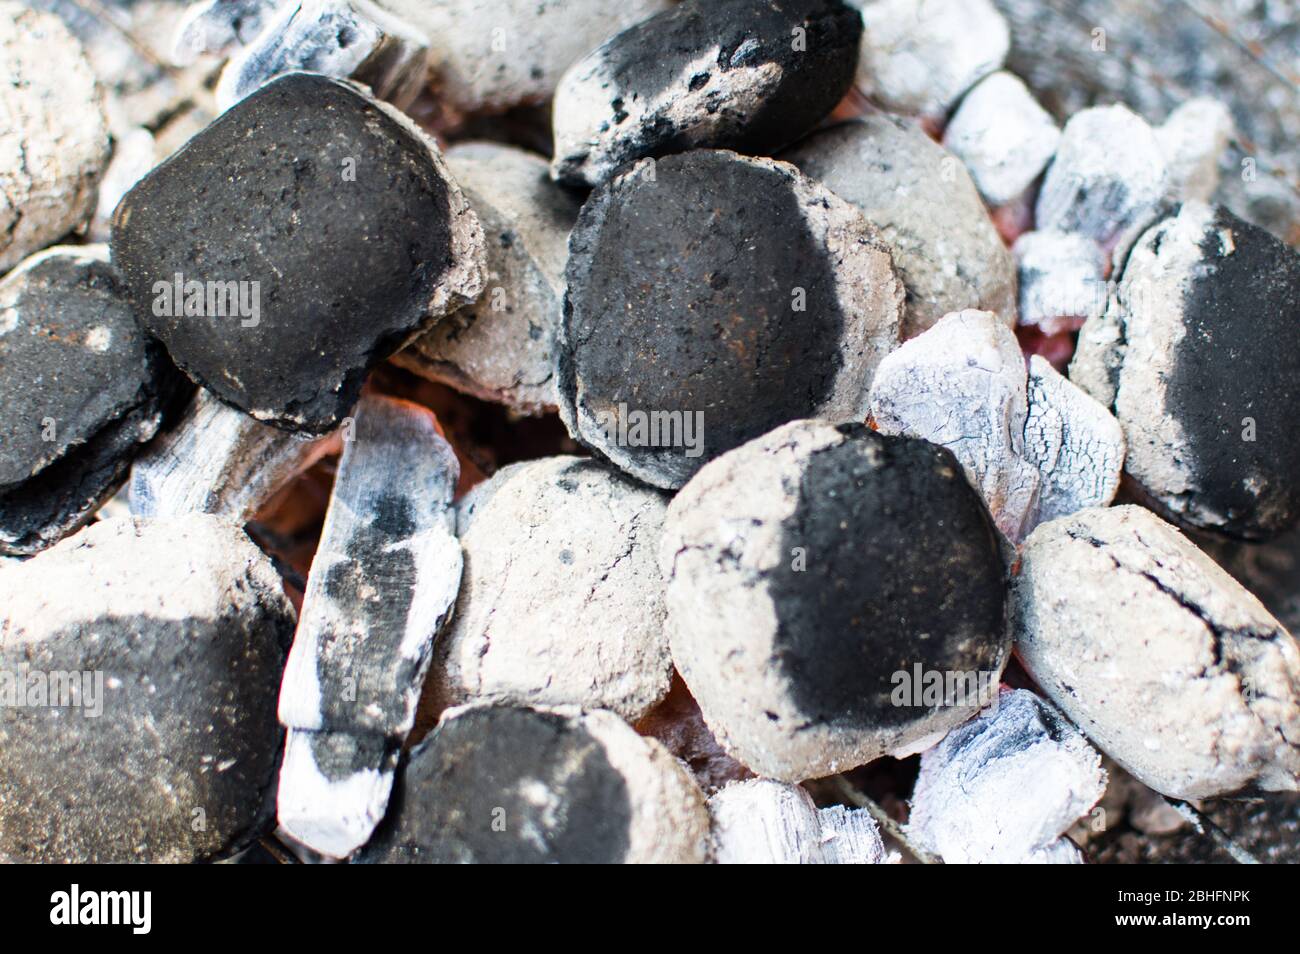 Lump wood briquettes burning in a small barbecue fire pit Stock Photo